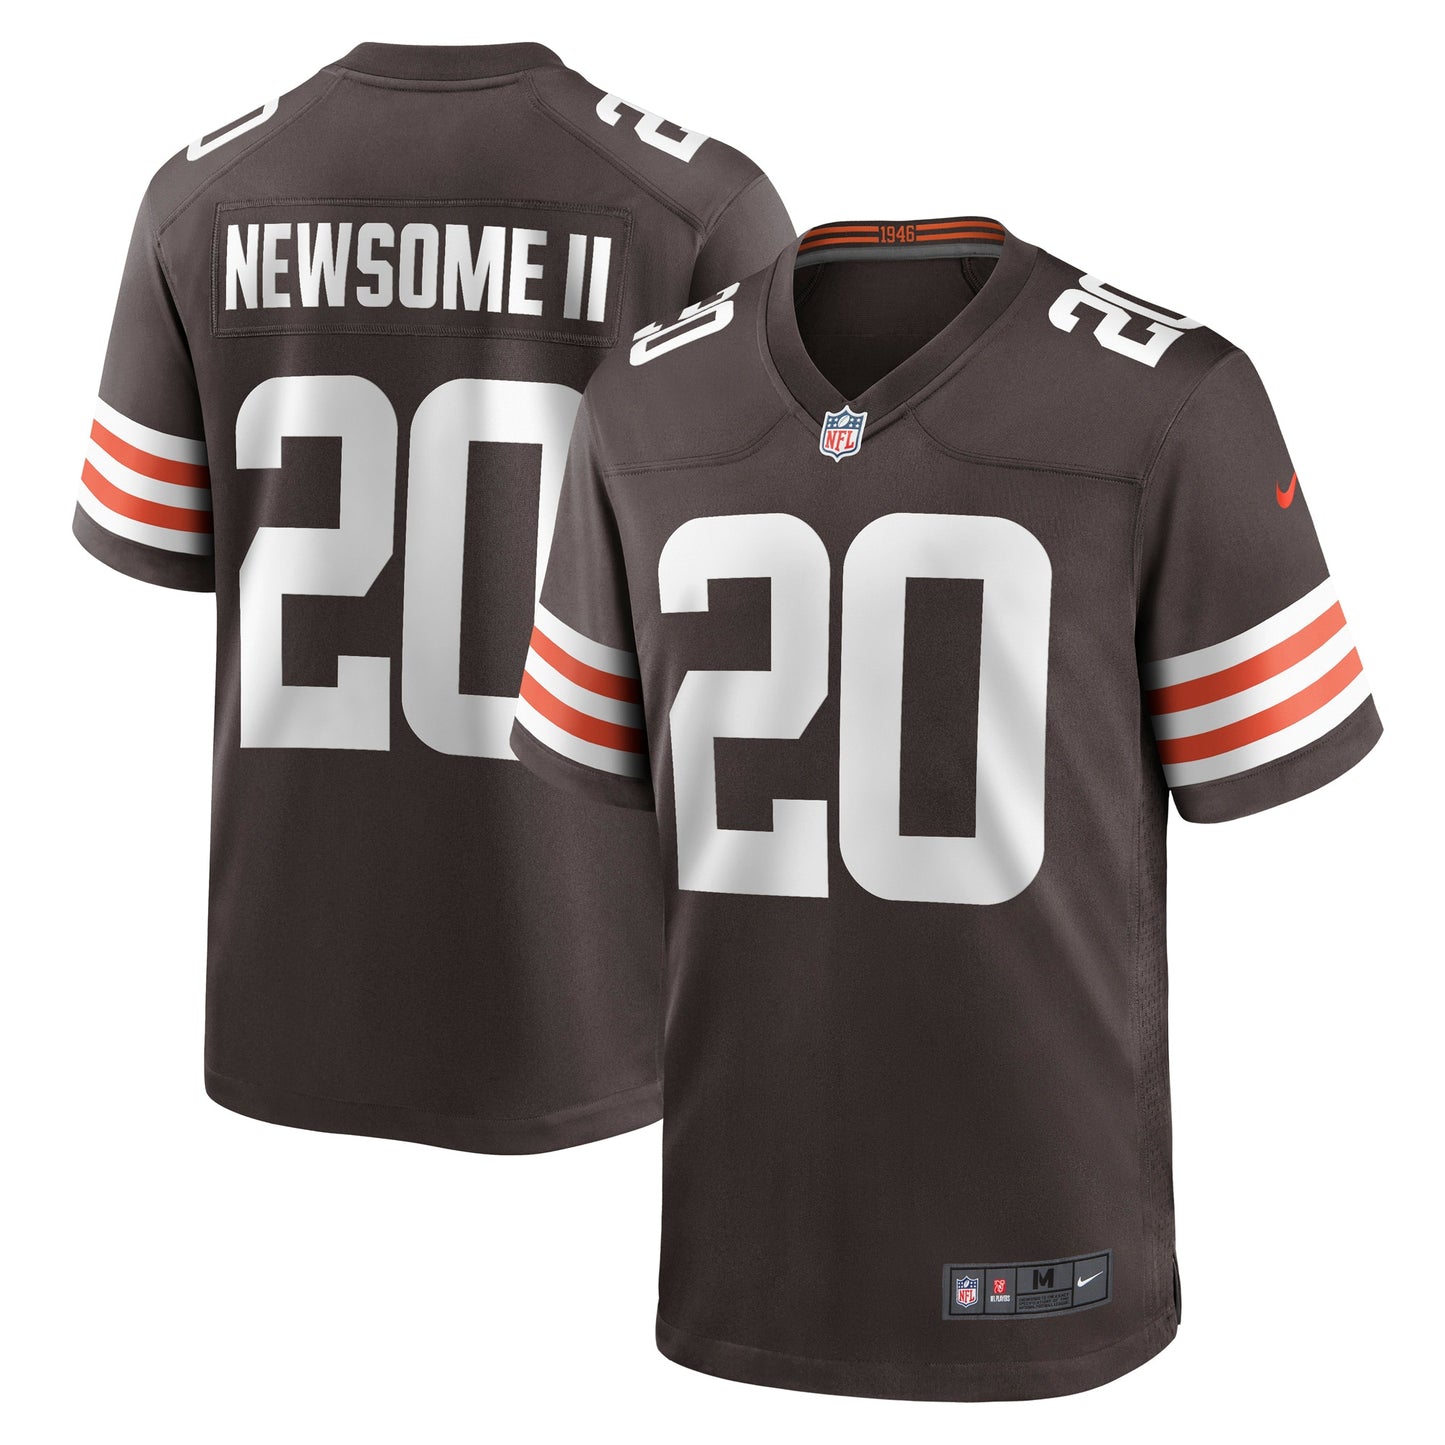 Gregory Newsome II Cleveland Browns Nike Game Jersey - Brown